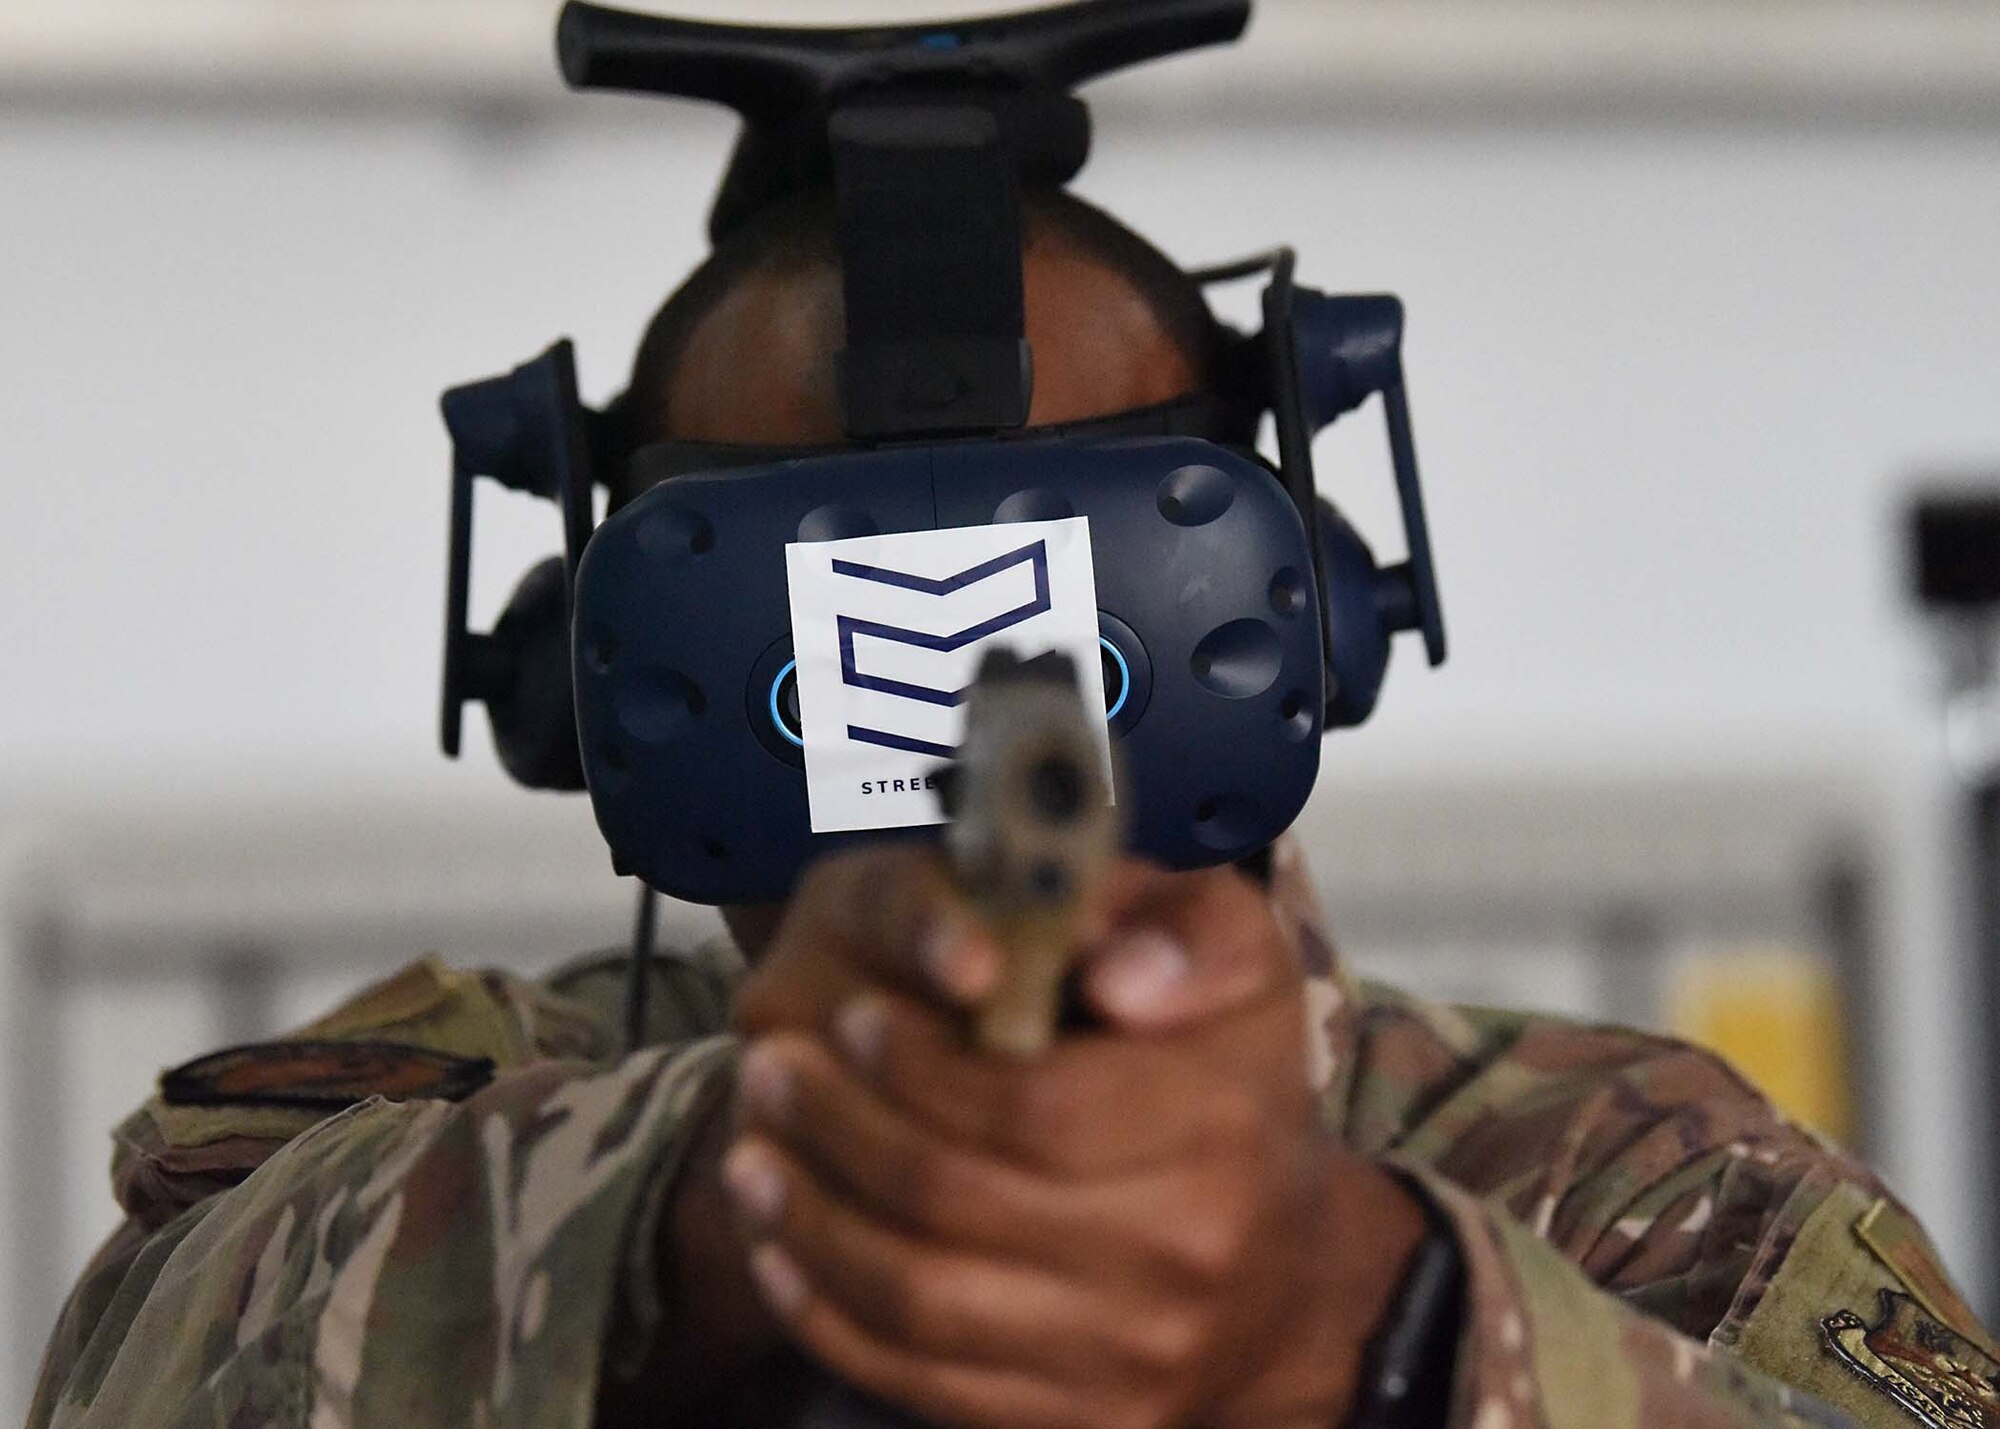 U.S. Air Force Master Sgt. Kenneth Greene, 380th Expeditionary Security Forces Squadron training NCO in charge, points a simulated M-18 while wearing a virtual reality (VR) system at Al Dhafra Air Base (ADAB), United Arab Emirates, Jan. 20, 2020.